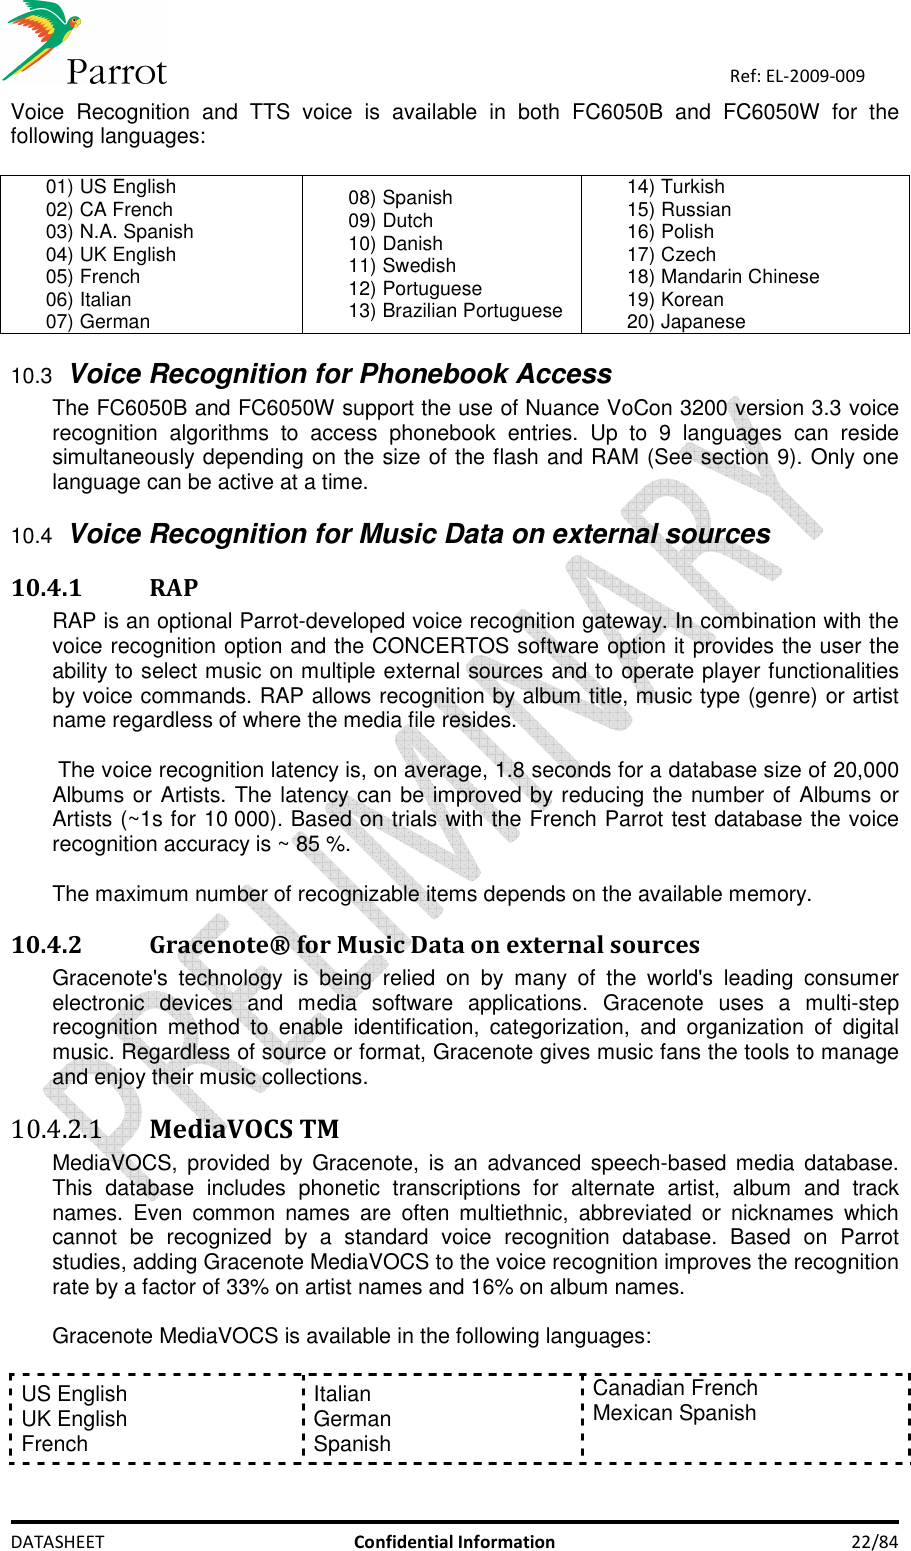    DATASHEET  Confidential Information  22/84 Ref: EL-2009-009 Voice  Recognition  and  TTS  voice  is  available  in  both  FC6050B  and  FC6050W  for  the following languages:   01) US English 02) CA French 03) N.A. Spanish 04) UK English 05) French 06) Italian 07) German 08) Spanish 09) Dutch 10) Danish 11) Swedish 12) Portuguese 13) Brazilian Portuguese 14) Turkish  15) Russian 16) Polish 17) Czech 18) Mandarin Chinese 19) Korean 20) Japanese 10.3 Voice Recognition for Phonebook Access The FC6050B and FC6050W support the use of Nuance VoCon 3200 version 3.3 voice recognition  algorithms  to  access  phonebook  entries.  Up  to  9  languages  can  reside simultaneously depending on the size of the flash and RAM (See section 9). Only one language can be active at a time.  10.4 Voice Recognition for Music Data on external sources 10.4.1 RAP RAP is an optional Parrot-developed voice recognition gateway. In combination with the voice recognition option and the CONCERTOS software option it provides the user the ability to select music on multiple external sources and to operate player functionalities by voice commands. RAP allows recognition by album title, music type (genre) or artist name regardless of where the media file resides.   The voice recognition latency is, on average, 1.8 seconds for a database size of 20,000 Albums or Artists. The latency can be improved by reducing the number of Albums or Artists (~1s for 10 000). Based on trials with the French Parrot test database the voice recognition accuracy is ~ 85 %.   The maximum number of recognizable items depends on the available memory. 10.4.2 Gracenote® for Music Data on external sources  Gracenote&apos;s  technology  is  being  relied  on  by  many  of  the  world&apos;s  leading  consumer electronic  devices  and  media  software  applications.  Gracenote  uses  a  multi-step recognition  method  to  enable  identification,  categorization,  and  organization  of  digital music. Regardless of source or format, Gracenote gives music fans the tools to manage and enjoy their music collections. 10.4.2.1 MediaVOCS TM MediaVOCS,  provided by  Gracenote,  is an  advanced speech-based  media  database. This  database  includes  phonetic  transcriptions  for  alternate  artist,  album  and  track names.  Even  common  names  are  often  multiethnic,  abbreviated  or  nicknames  which cannot  be  recognized  by  a  standard  voice  recognition  database.  Based  on  Parrot studies, adding Gracenote MediaVOCS to the voice recognition improves the recognition rate by a factor of 33% on artist names and 16% on album names.  Gracenote MediaVOCS is available in the following languages:  US English UK English  French Italian German Spanish Canadian French Mexican Spanish   